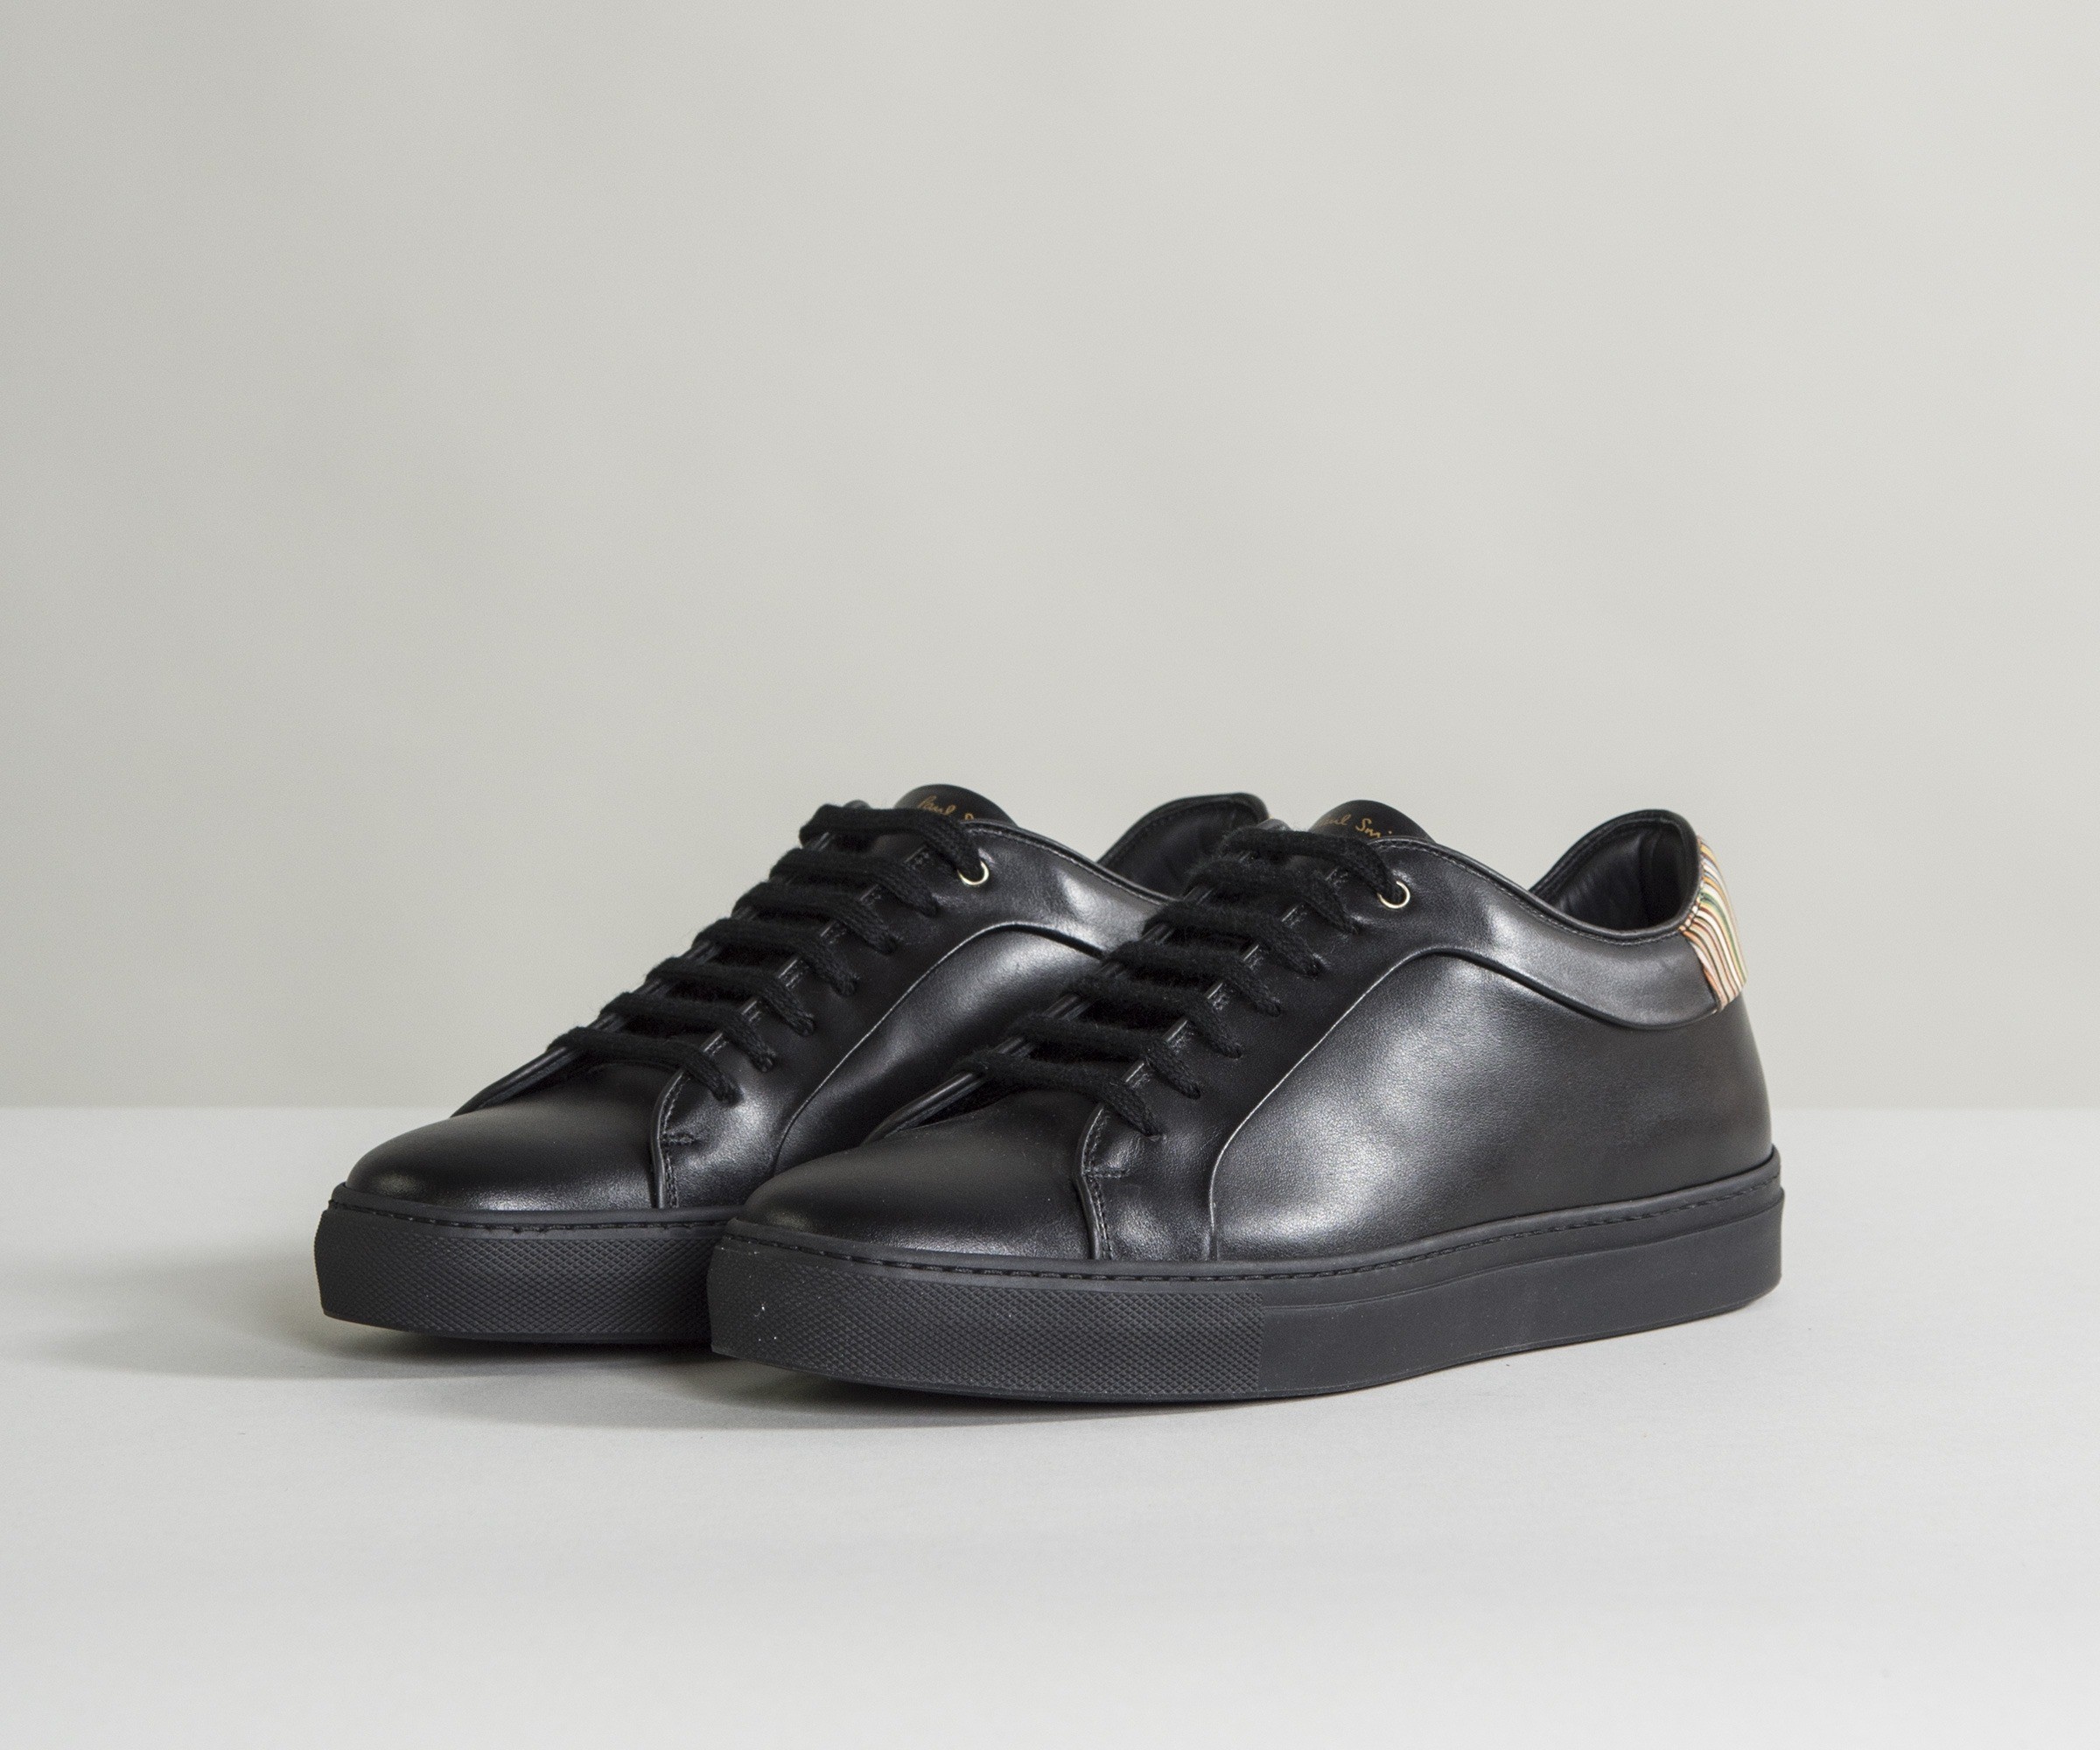 Paul Smith Shoes Shoes 'Basso' Trainers With Multi Stripe Heel Black